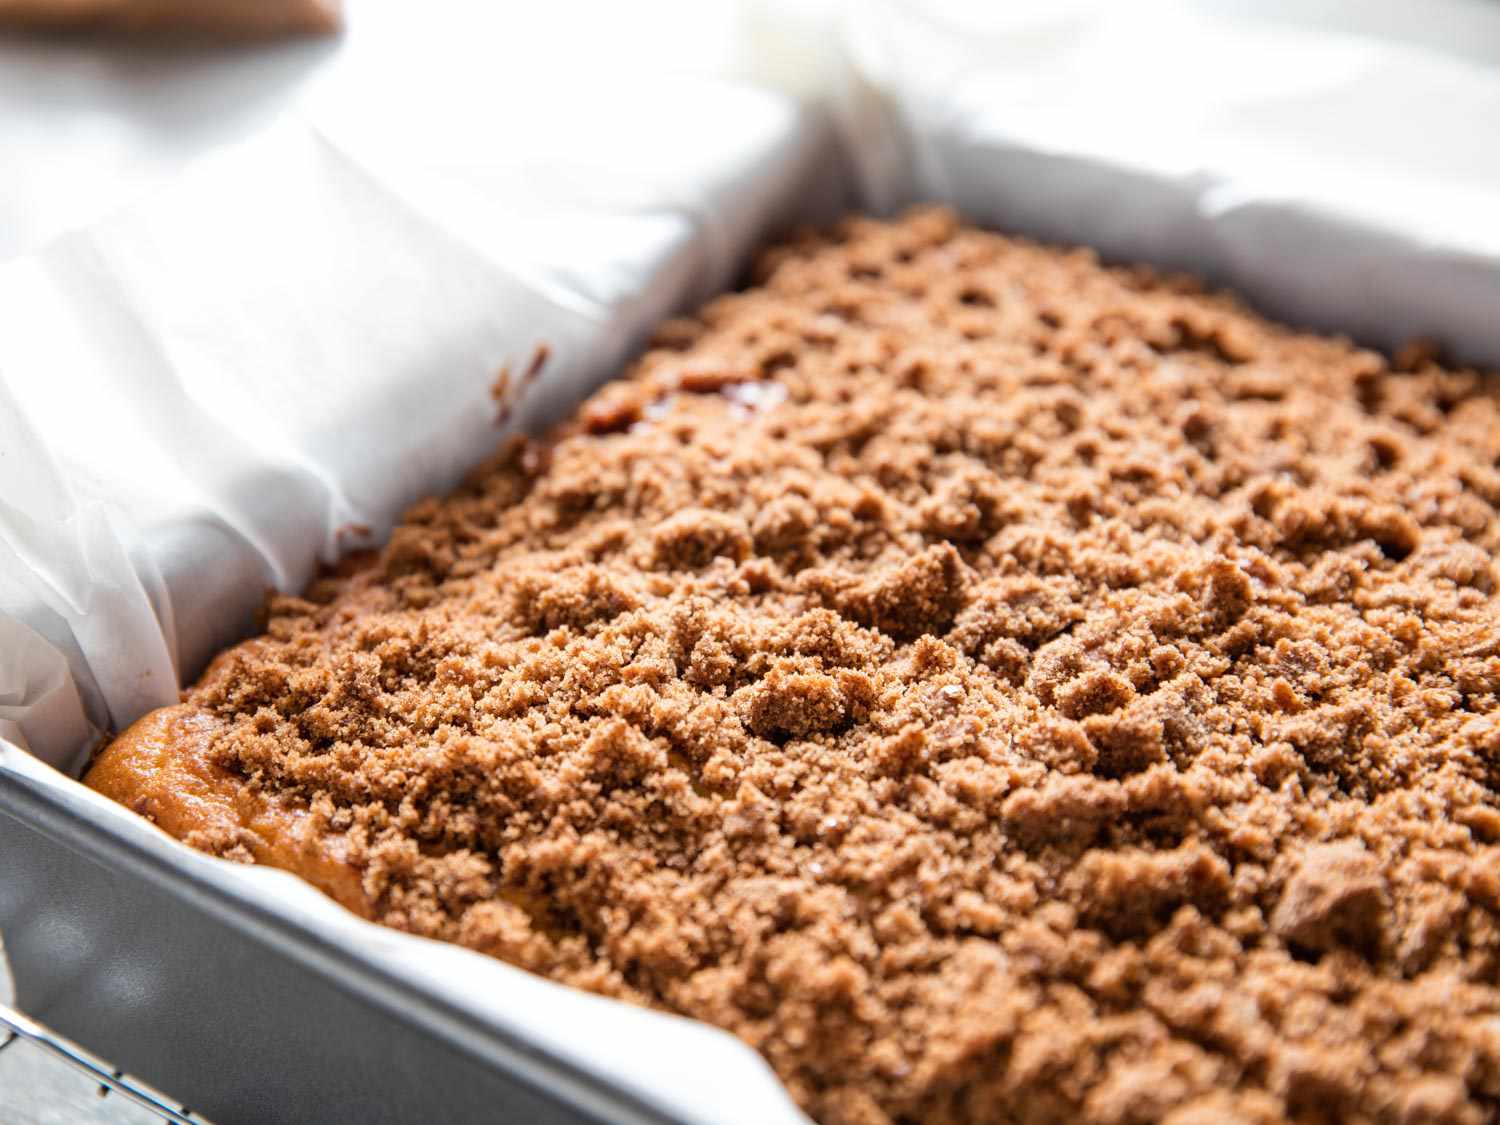 Baked coffee cake cooling in the pan.